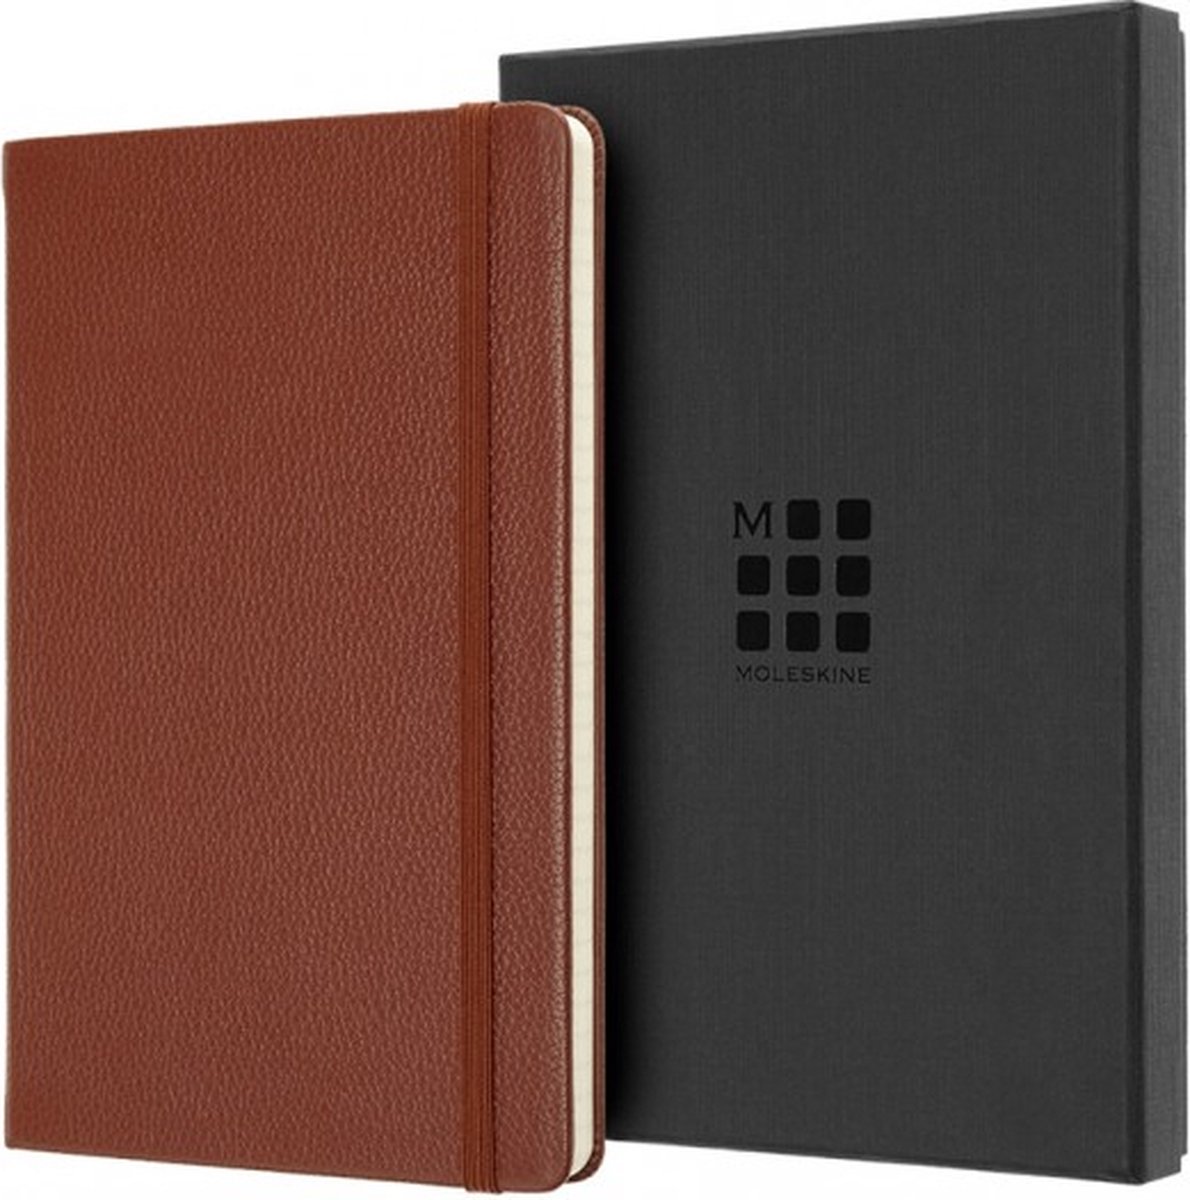 Moleskine - Large - Leather - Ruled- Notebook in Box - Sienna Brown